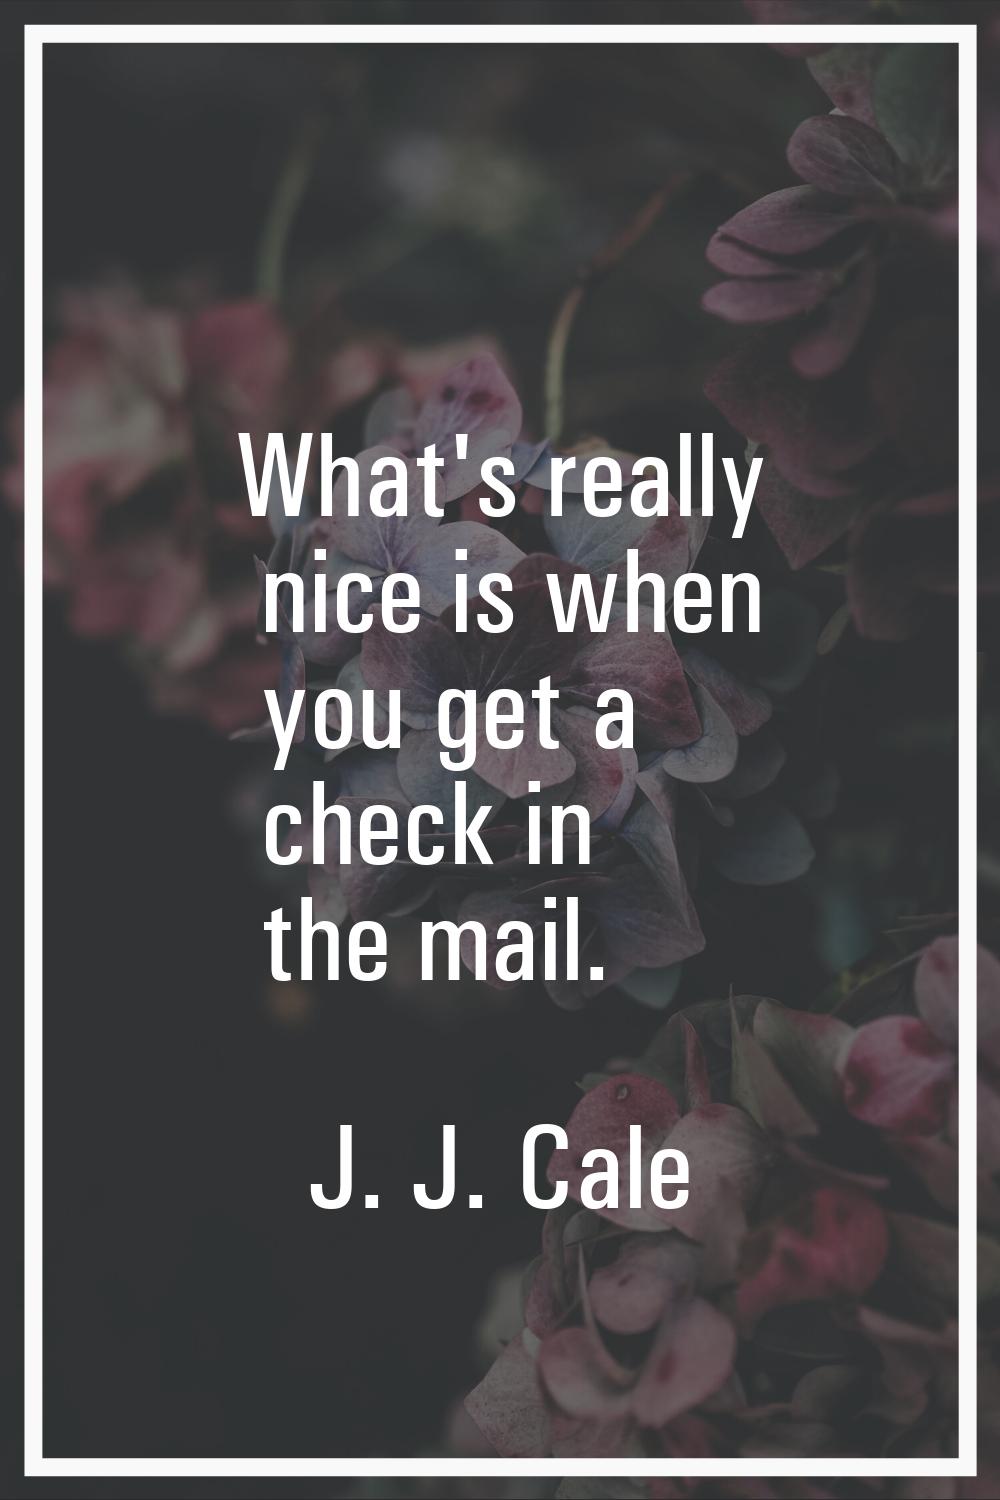 What's really nice is when you get a check in the mail.